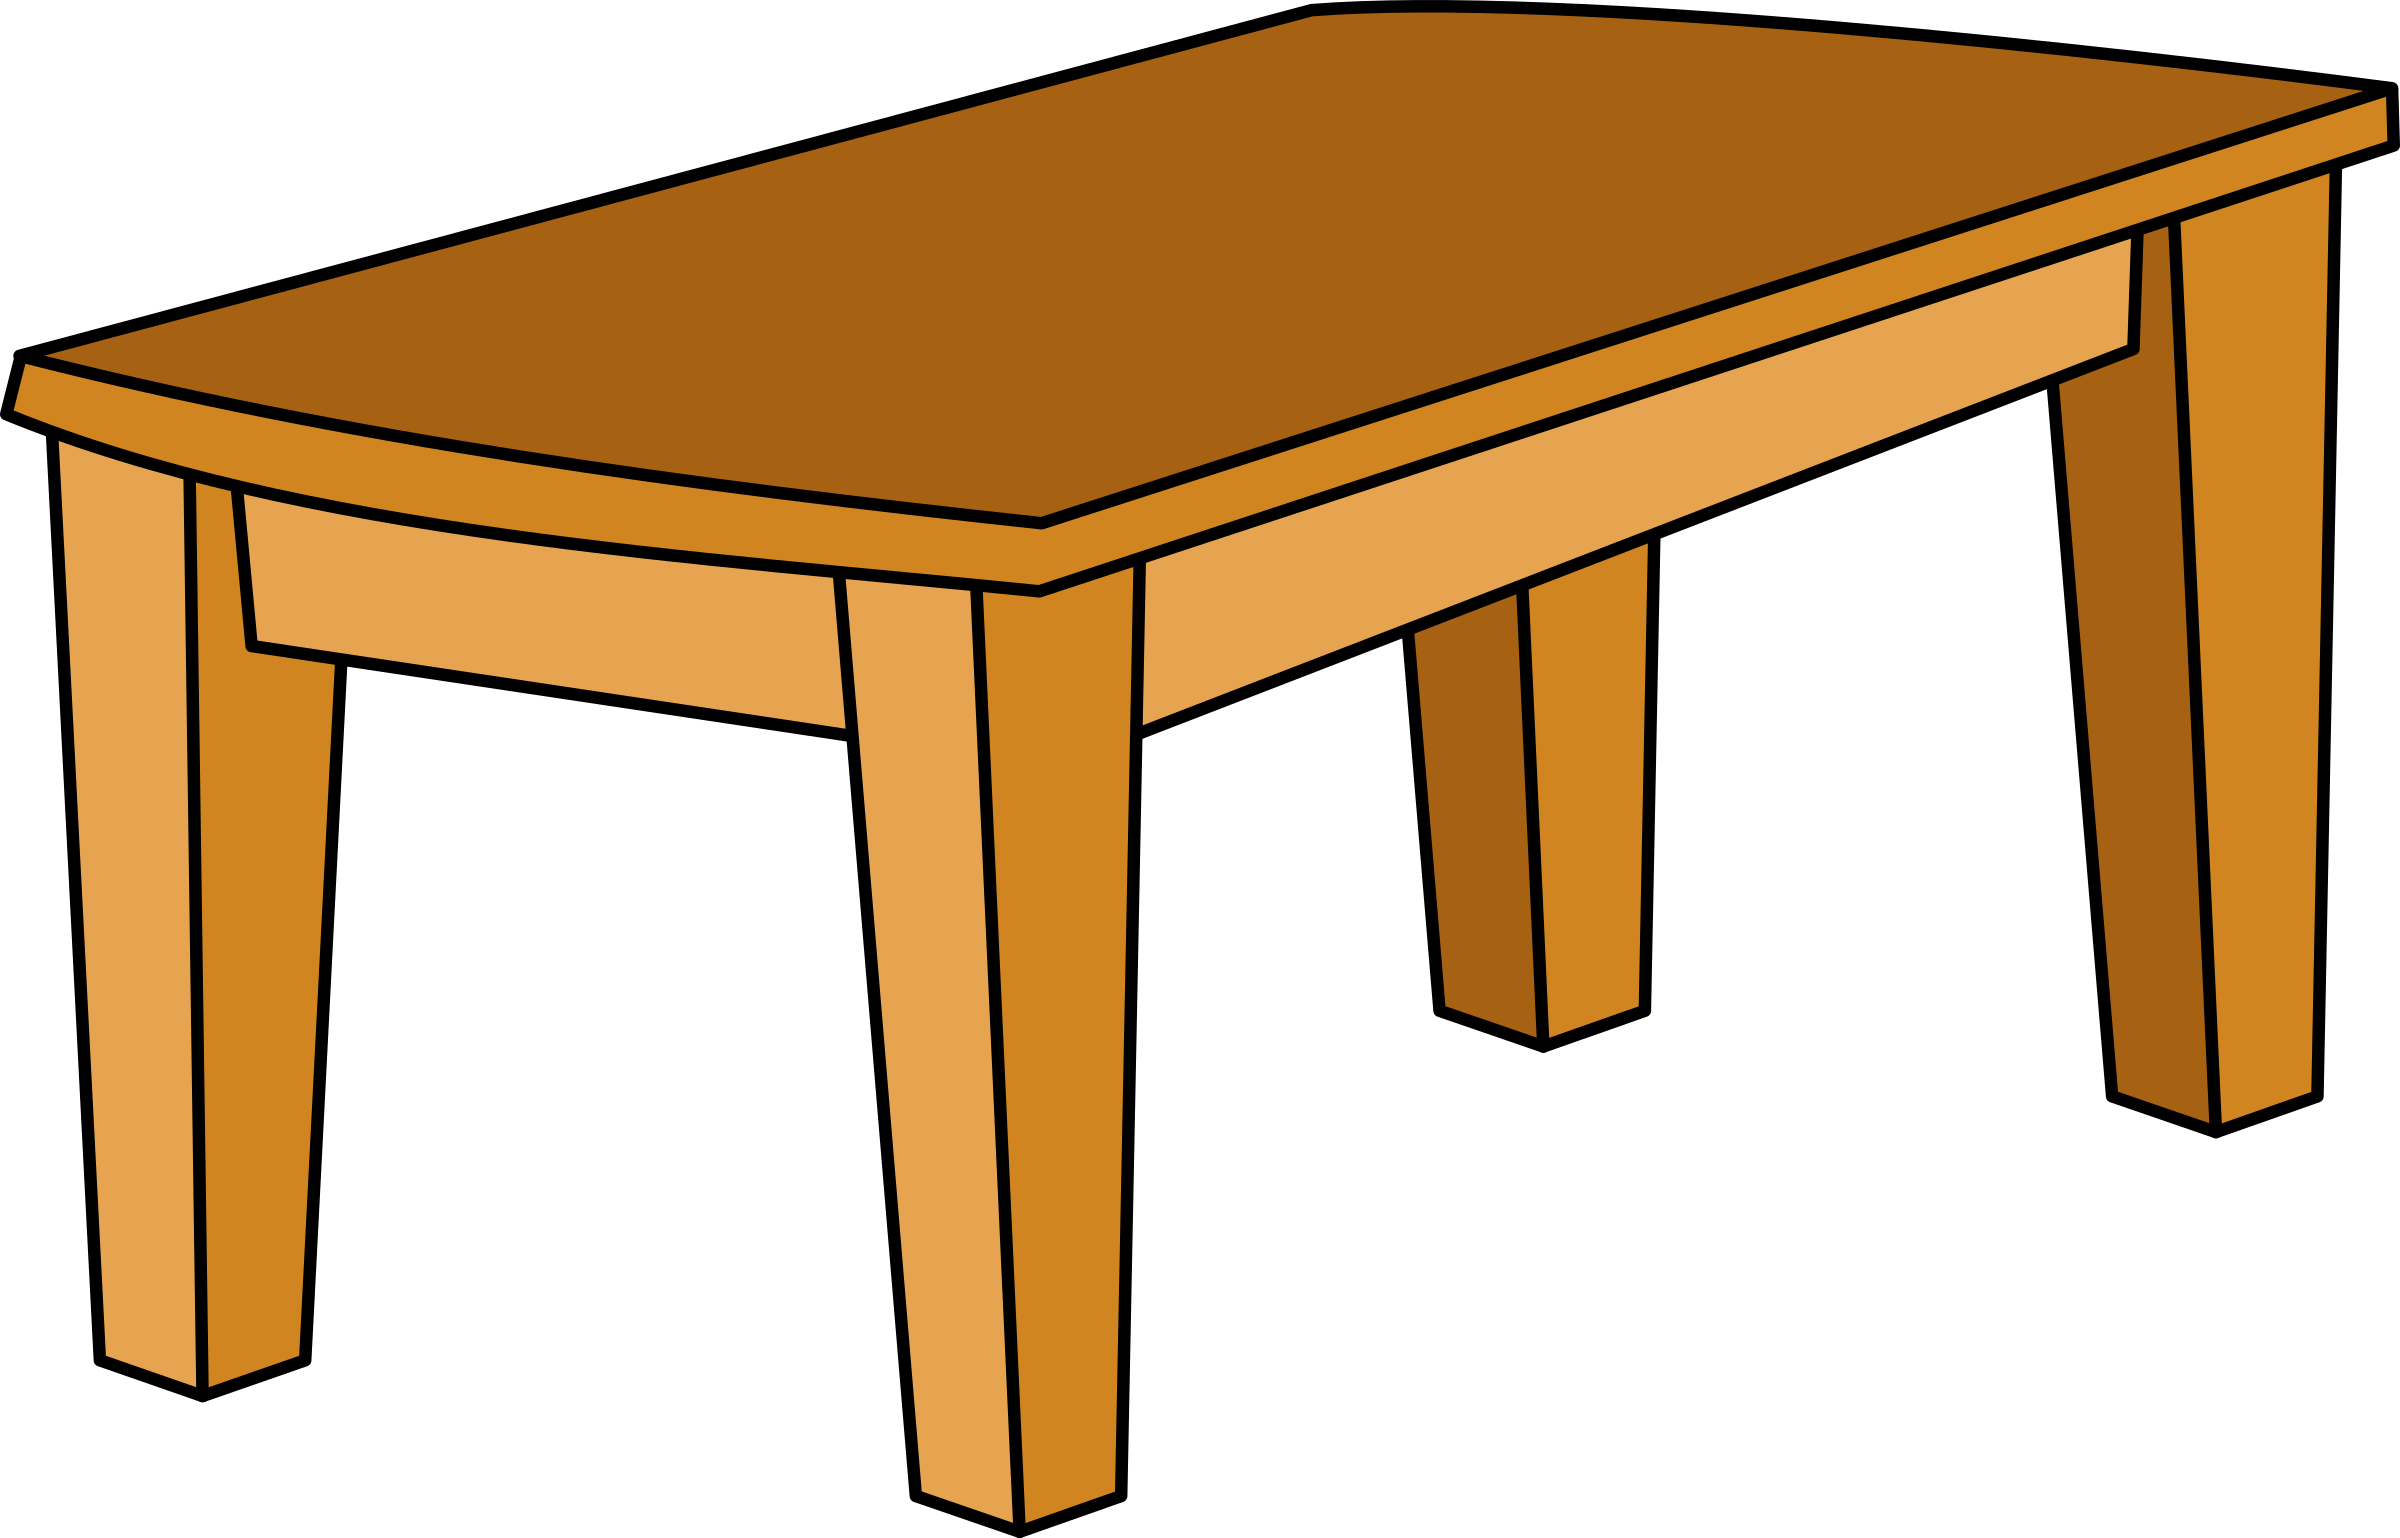 free-transparent-table-clipart-download-free-transparent-table-clipart